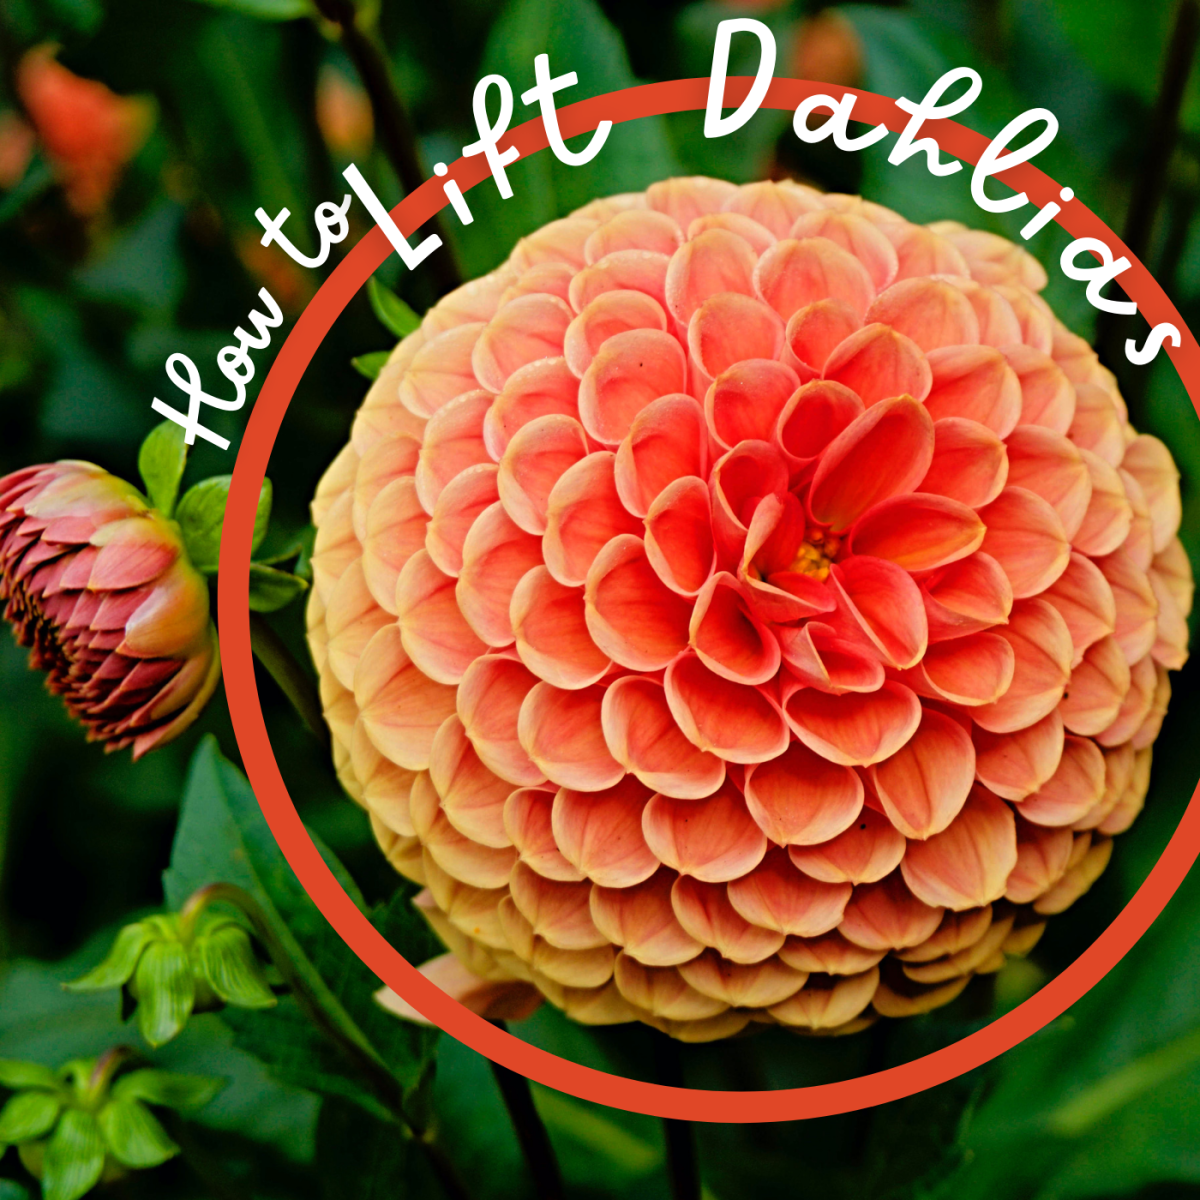 Protect your dahlia tubers by digging them up in the fall and storing them over winter. 